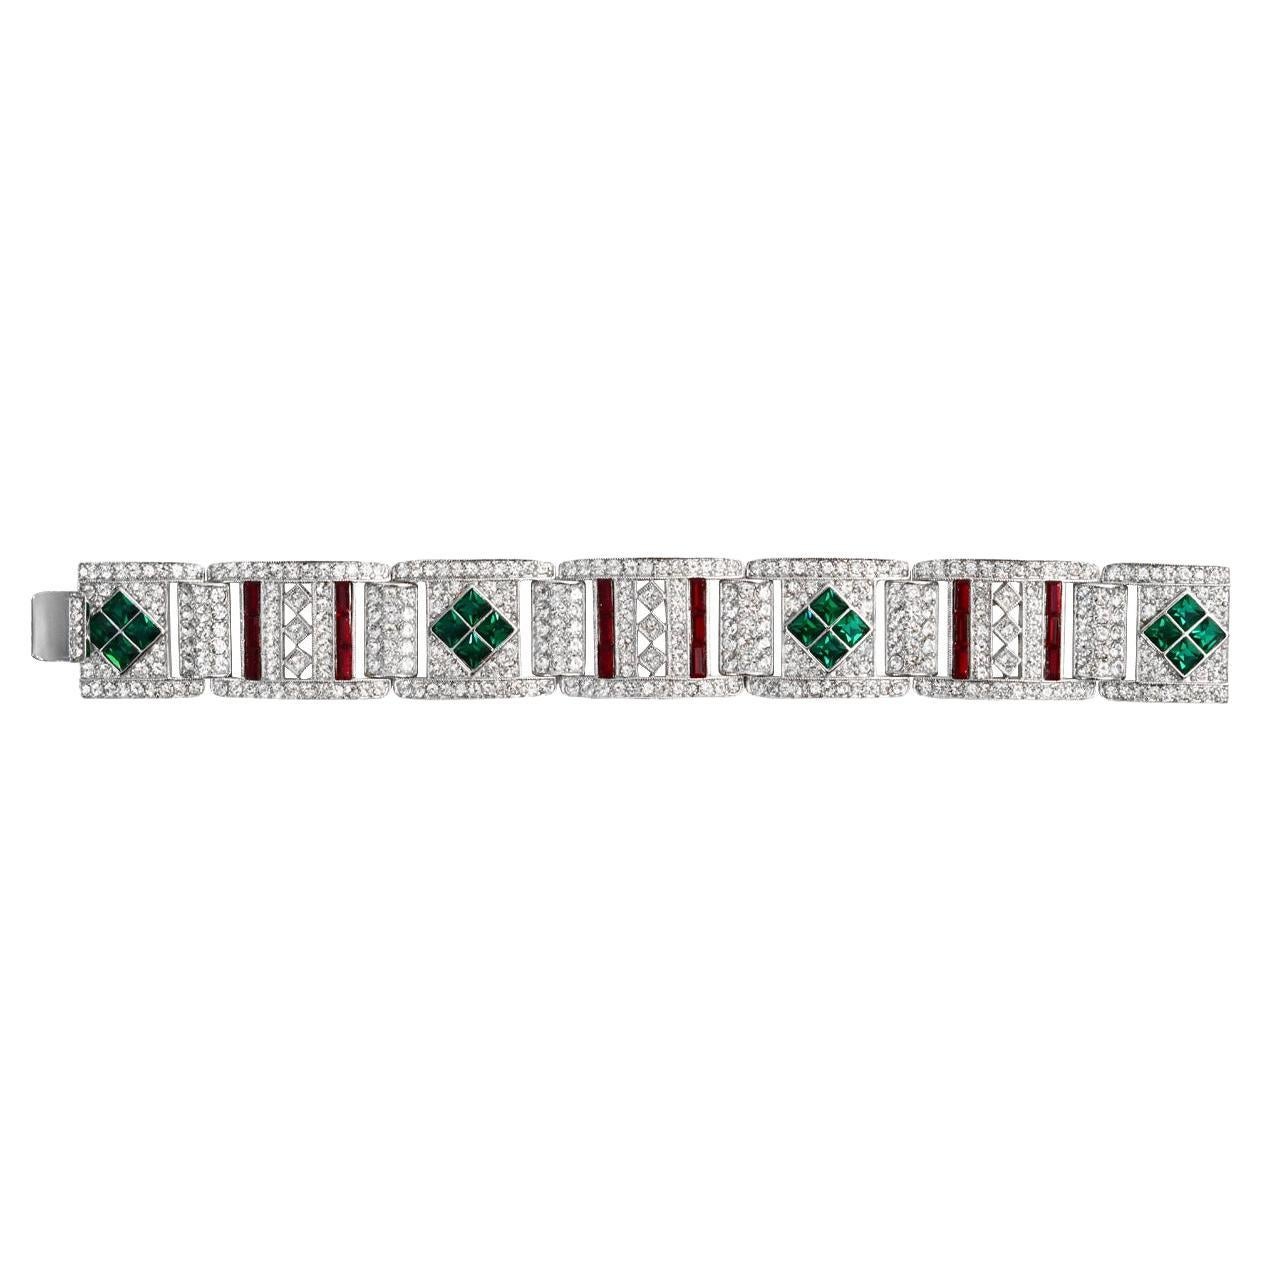 Vintage Art Deco 89 Faux Emerald, Ruby and Crystal Bracelet, Circa 1980s